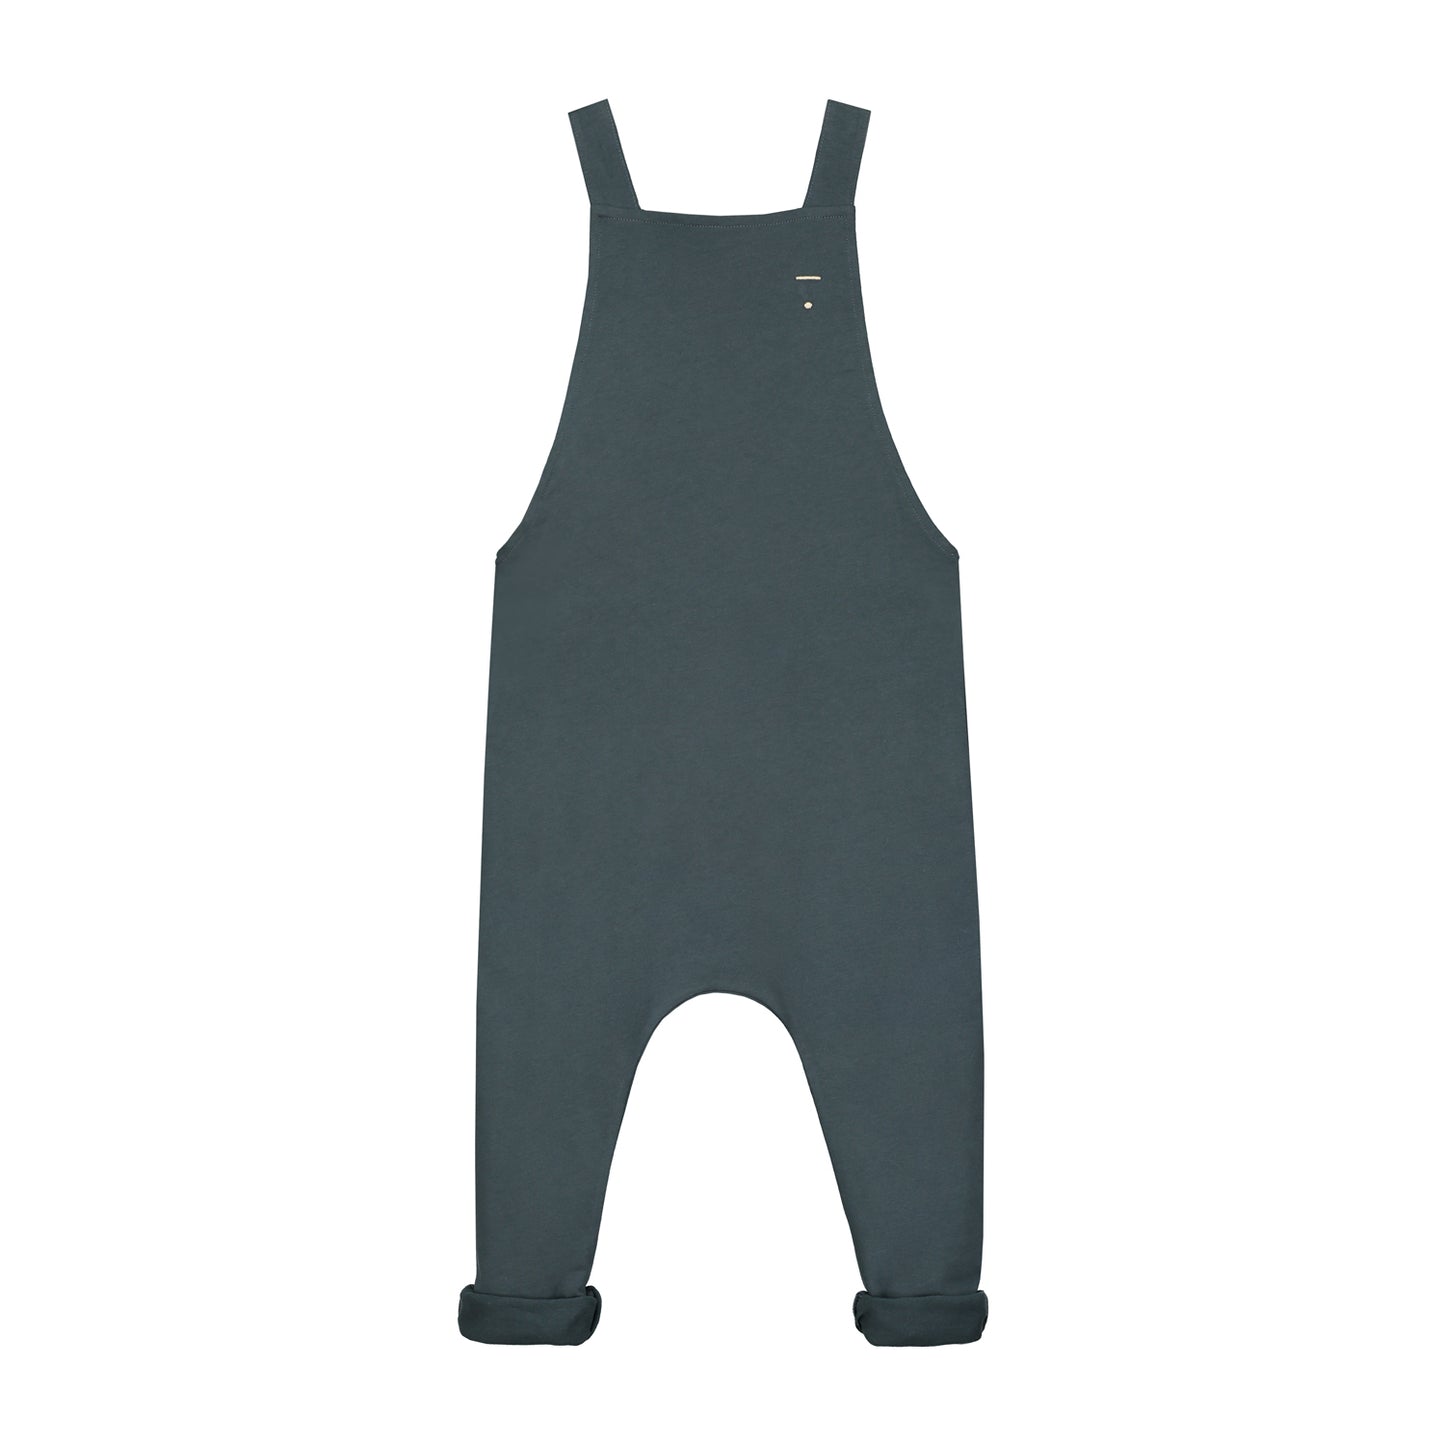 Gray Label Brushed Salopette Dungarees in blue grey is stocked in Nottingham’s childrens Shop Alf & Co.